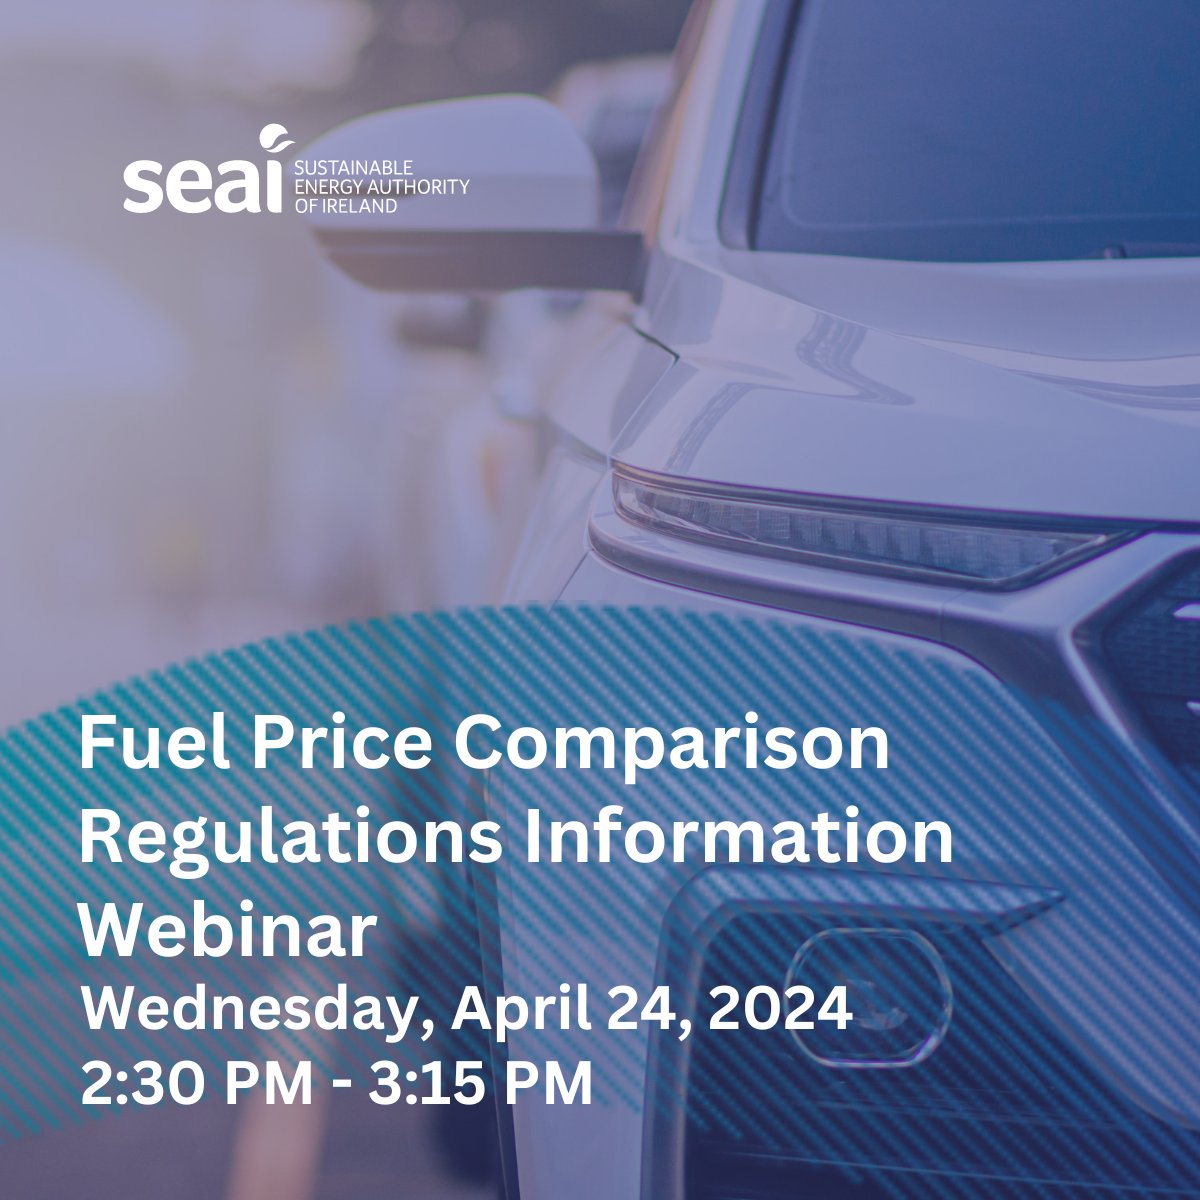 SEAI is hosting a Fuel Price Comparison Regulations Information Webinar on Wednesday the 24th of April at 2:30 p.m. Click the link to register ▶️ lnkd.in/eWXtcUAe